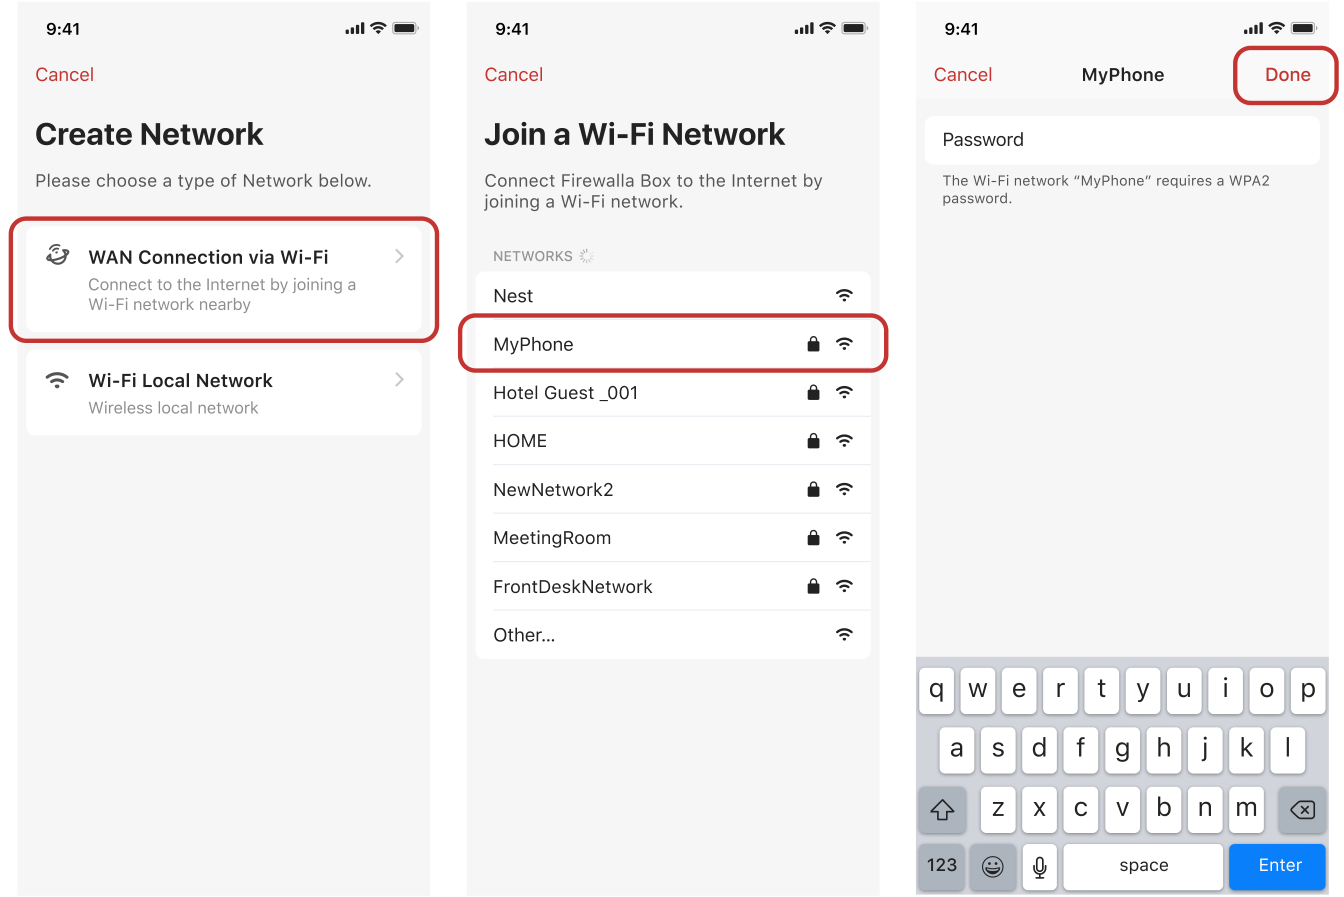 Steps showing how to install a wireless WAN connection via Wi-Fi using your phone's hotspot